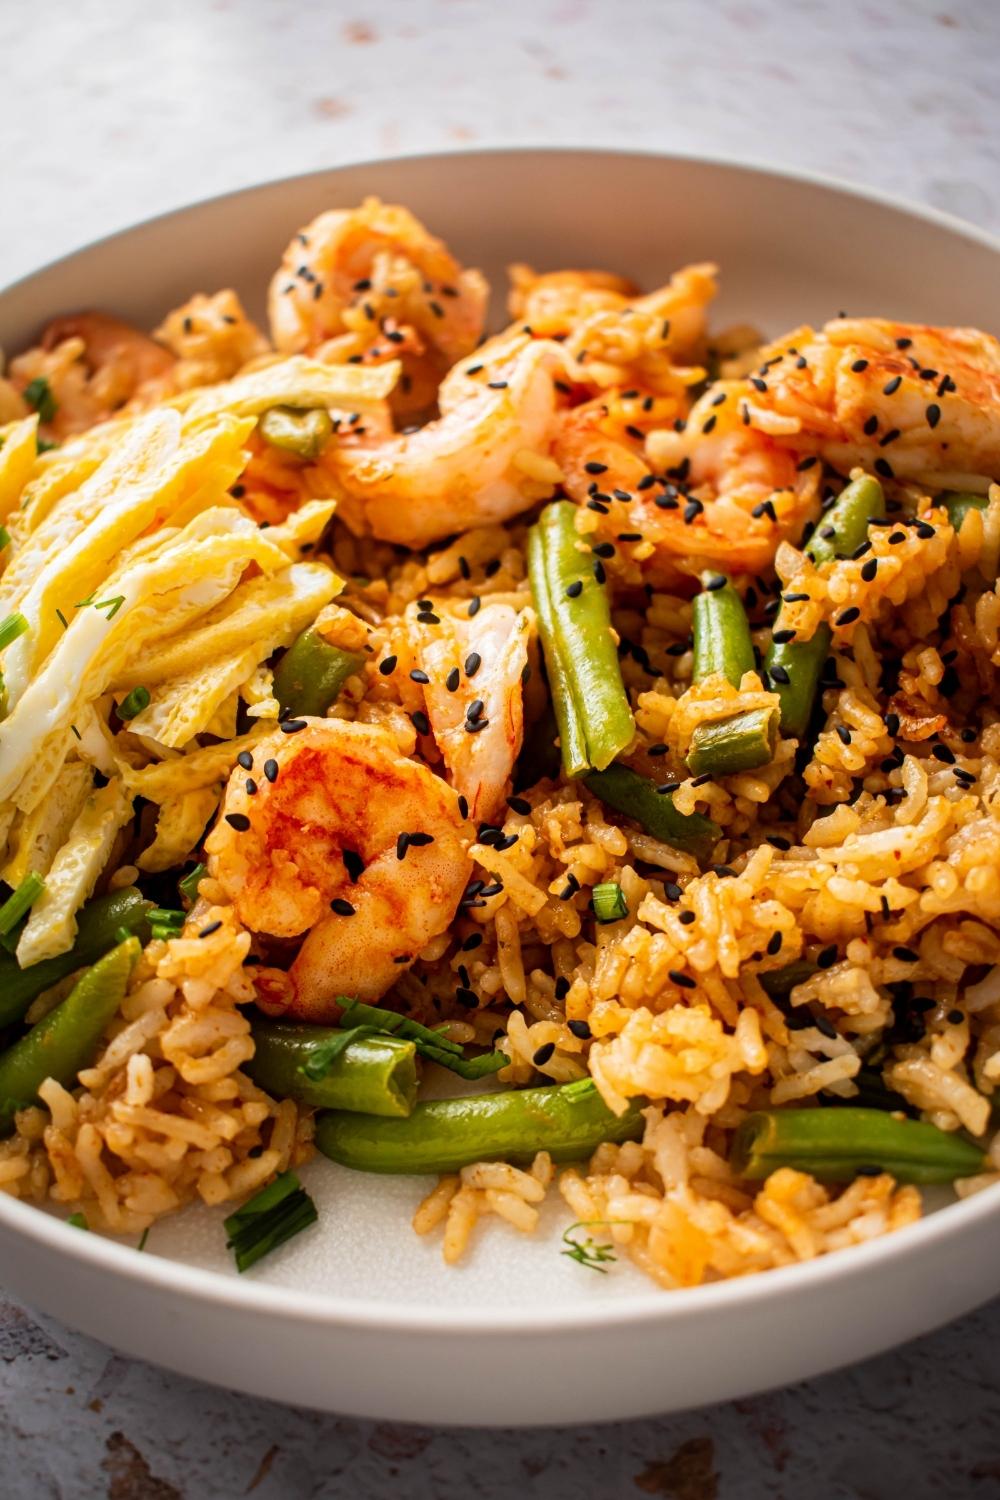 A close up of a bowl of Cajun Fried Rice with green beans, shrimp, and egg.